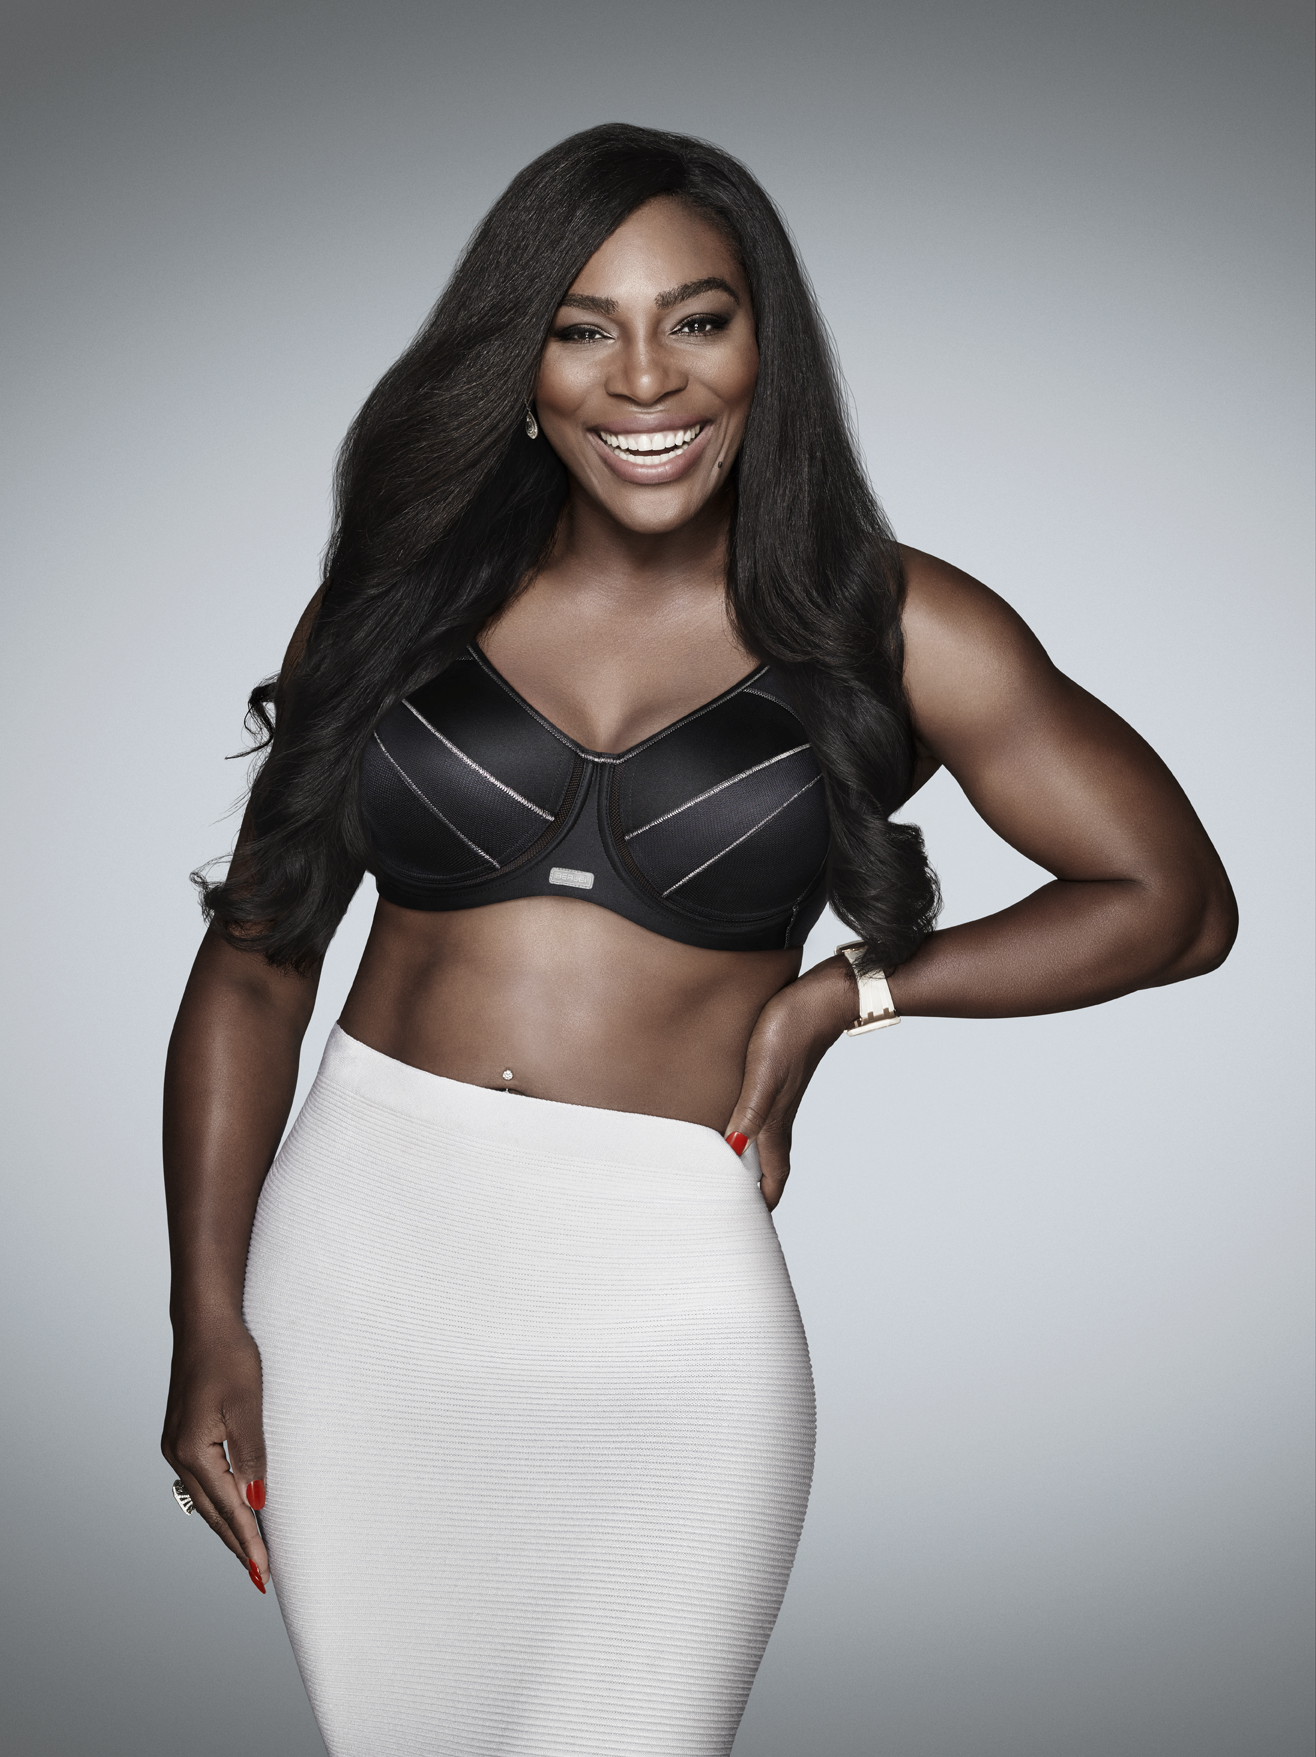 Serena Williams - My favorite sports bra brand, Berlei USA is finally  available in the US at Macy's! I've been wearing these bras for over 10  years! It's an essential in my